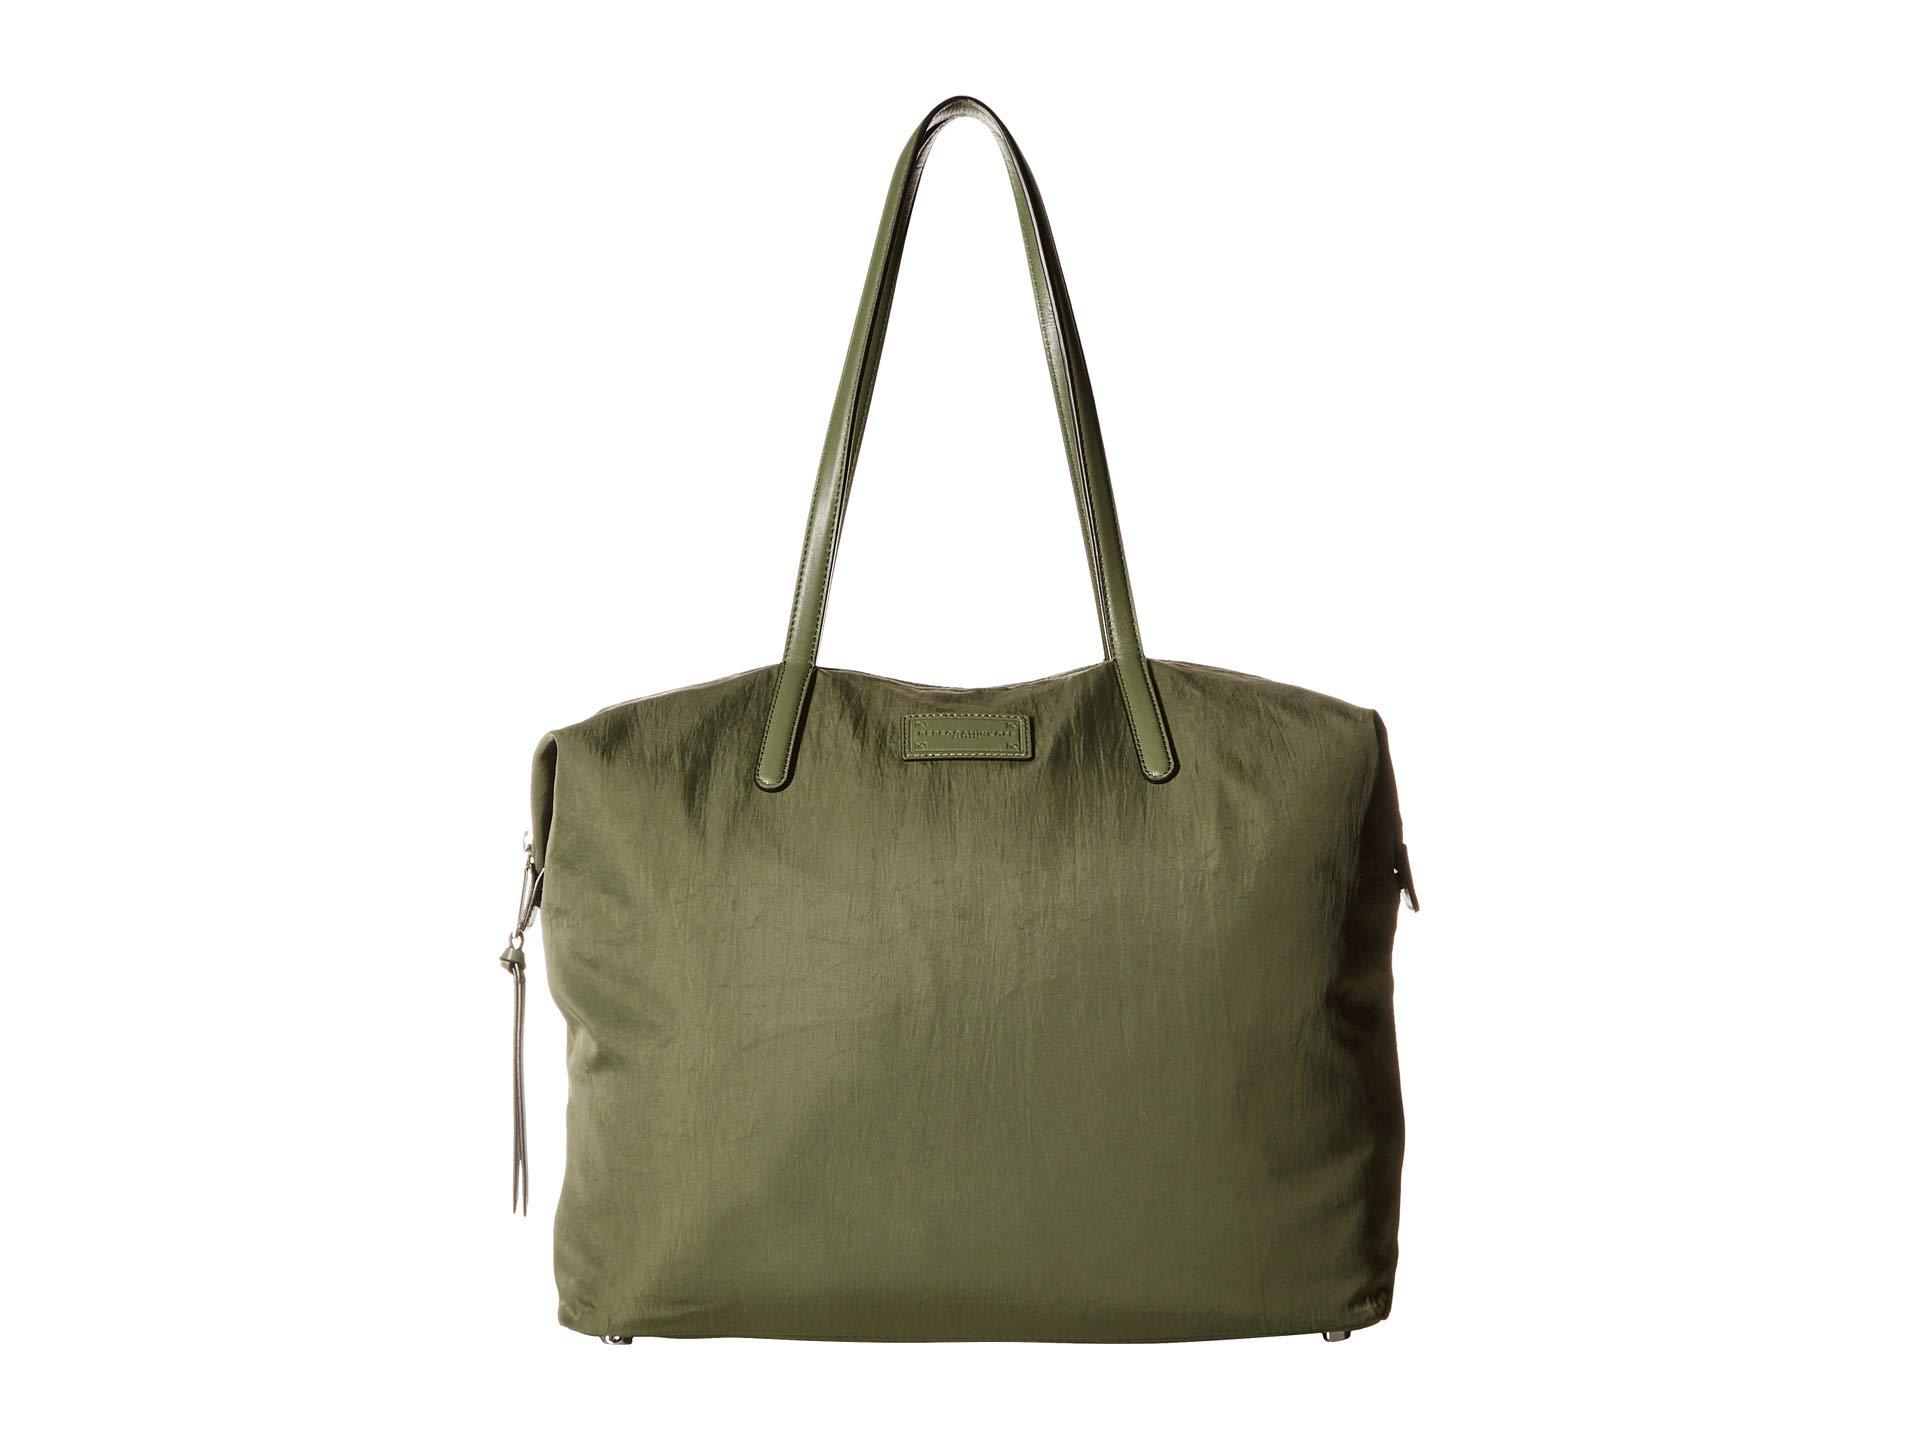 Rebecca Minkoff Synthetic Washed Nylon Tote in Olive (Green) - Lyst